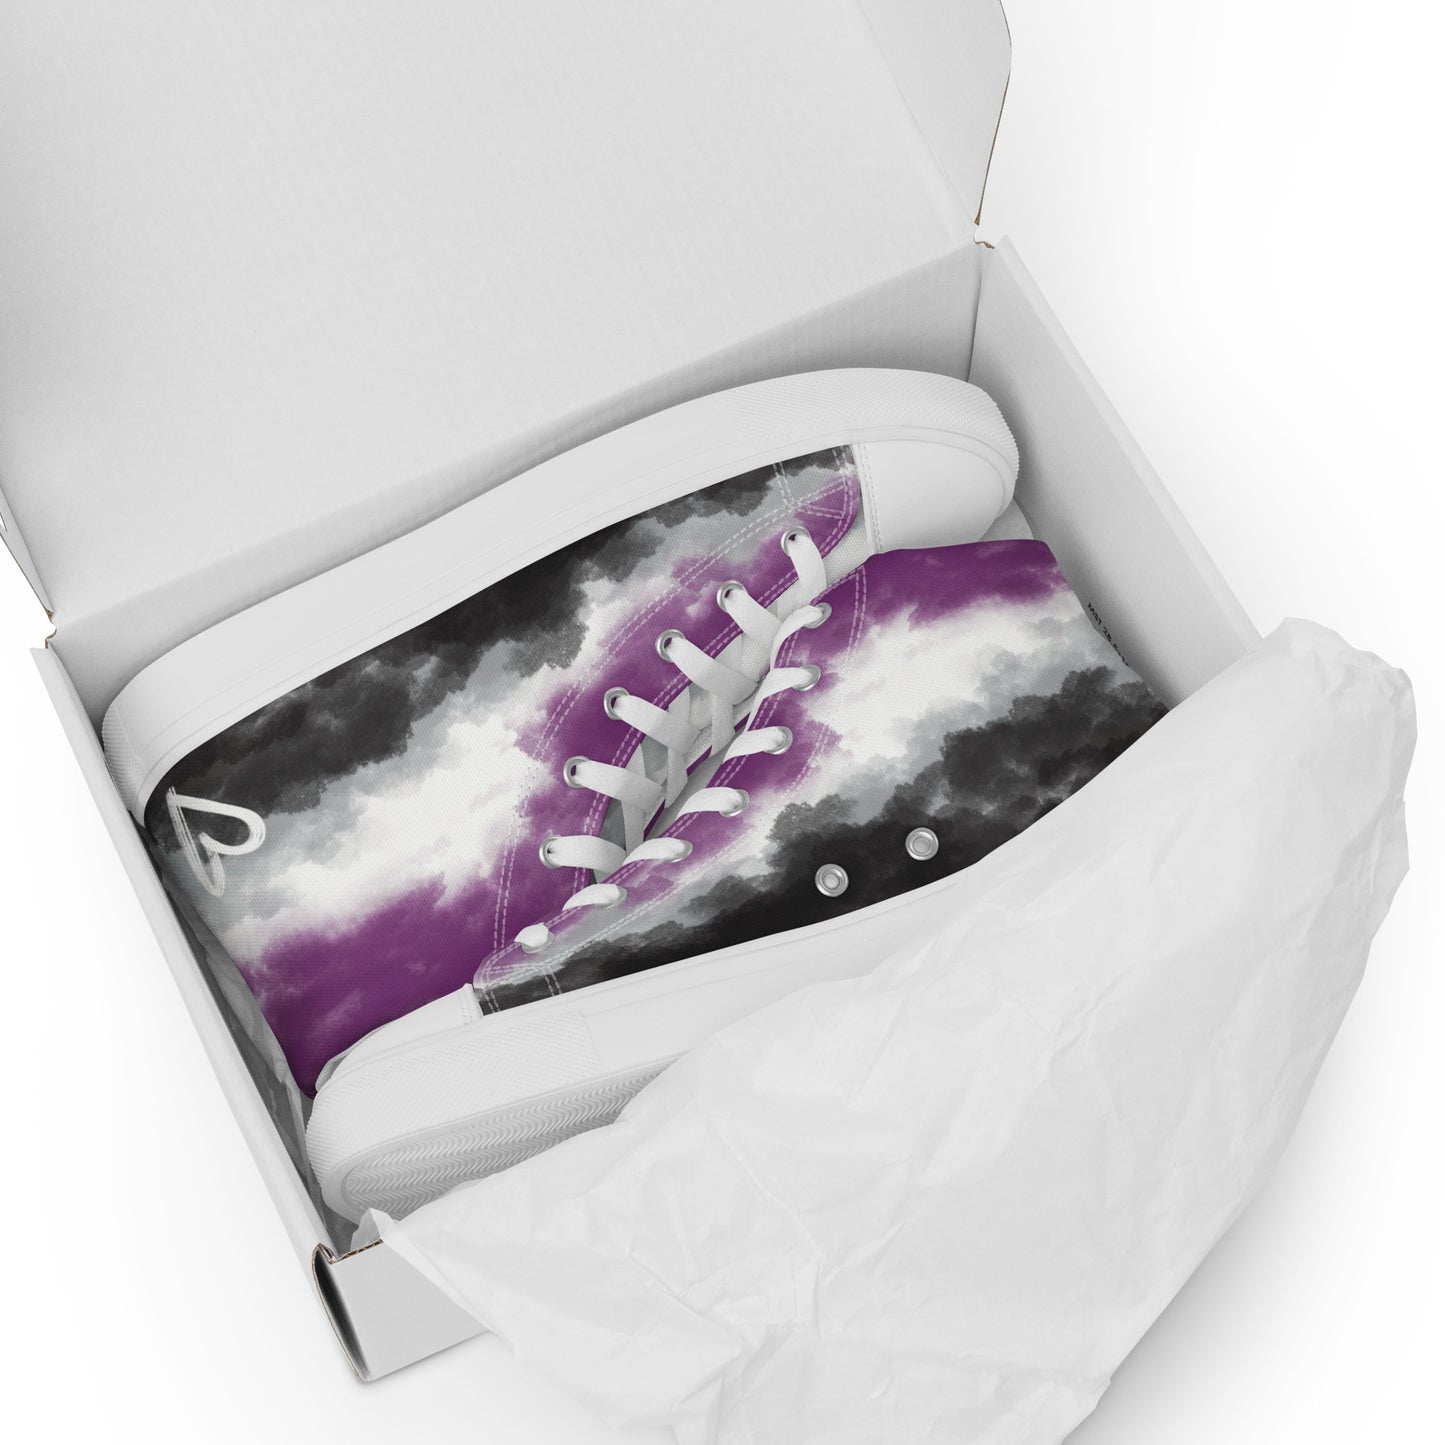 A pair of high top shoes with clouds in the asexual flag colors, a hand drawn white heart on the heel, white laces and accents, and the Aras Sivad Studio logo on the tongue sit in a white box with paper.